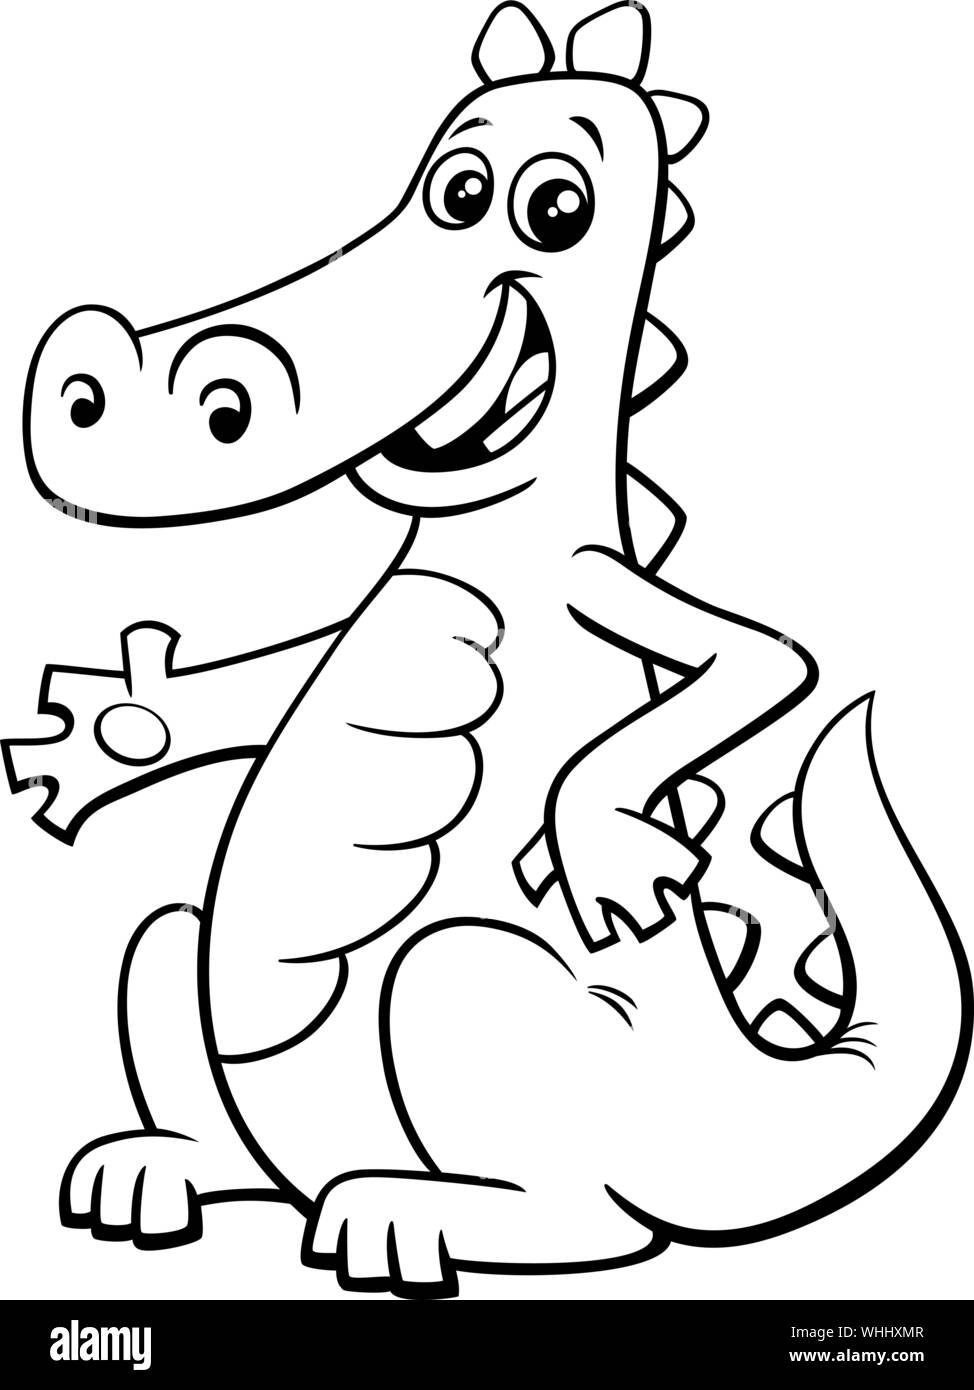 Black and White Cartoon Illustration of Funny Dragon Fantasy Animal Character Coloring Book Stock Vector